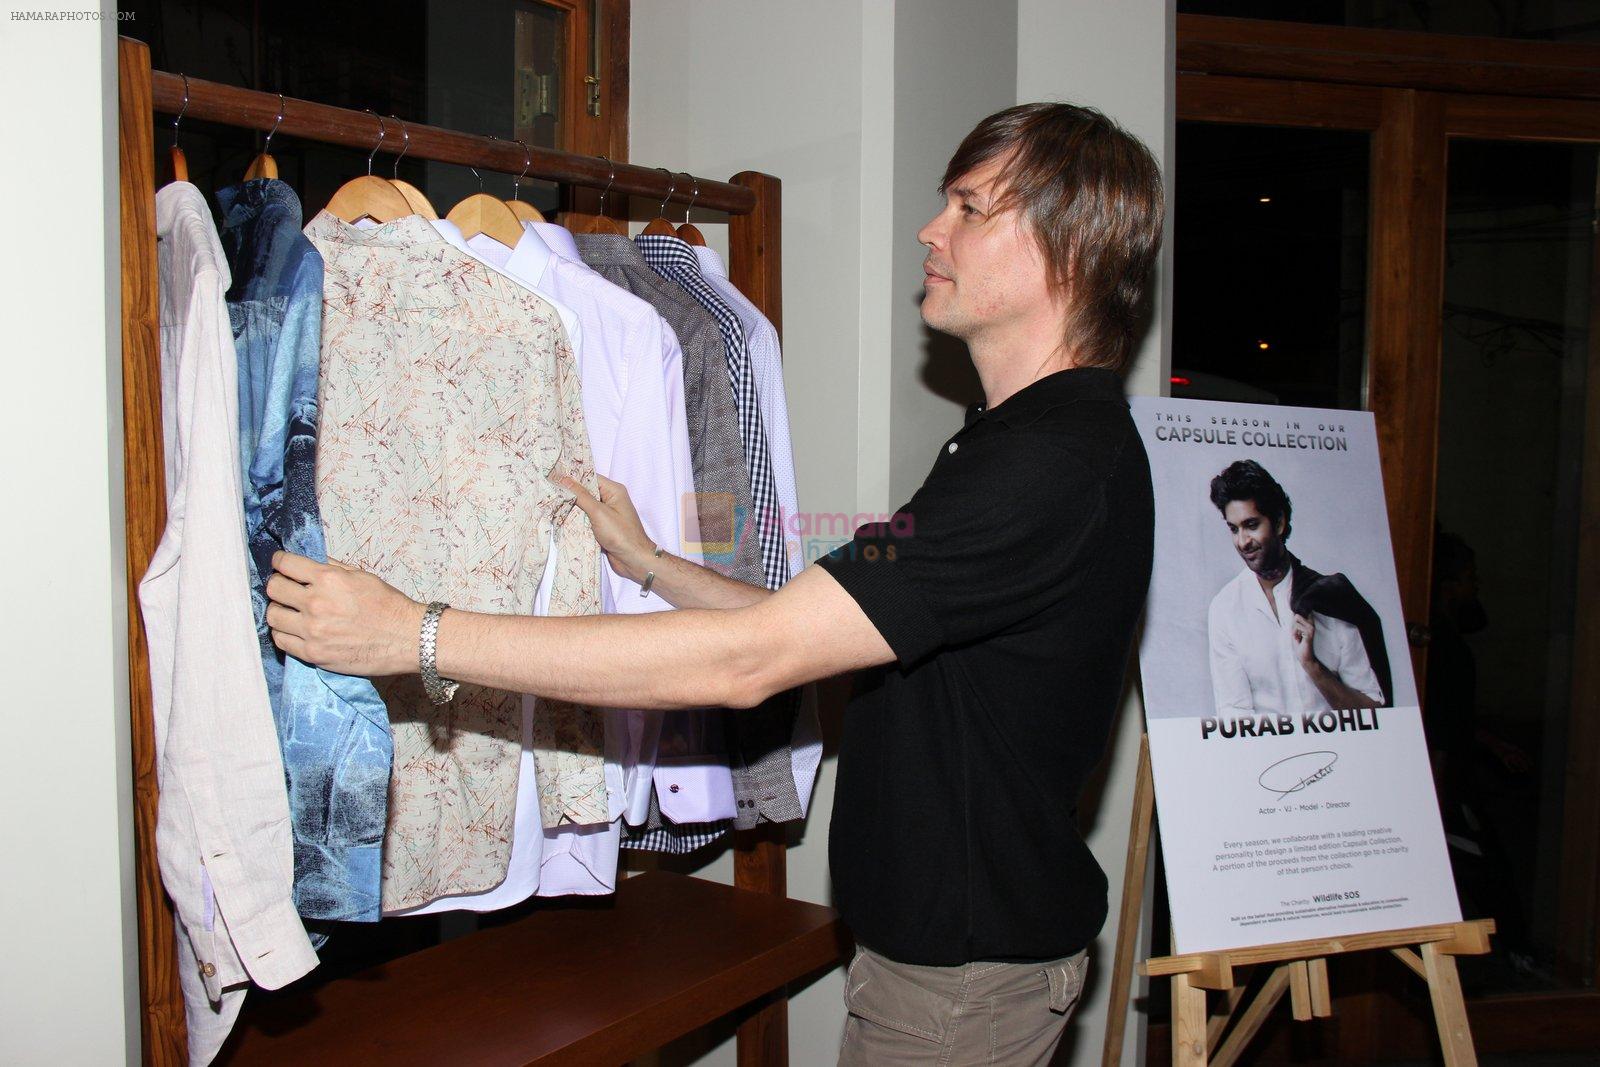 Luke Kenny at The Bombay Shirt Company event in Mumbai on 7th April 2015